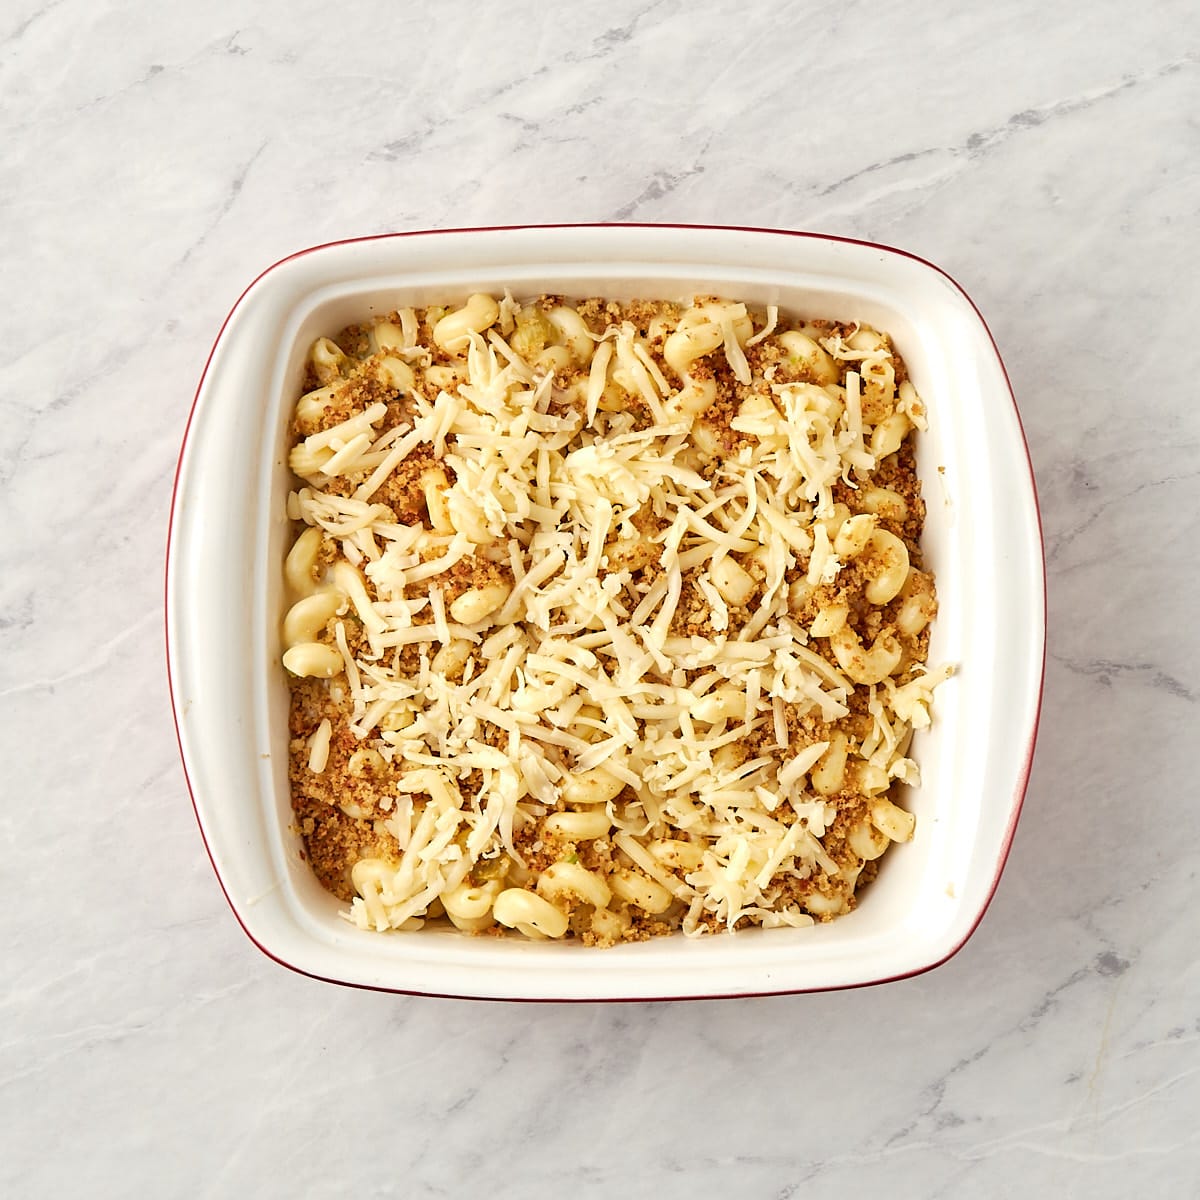 unbaked hatch mac and cheese in a casserole dish.